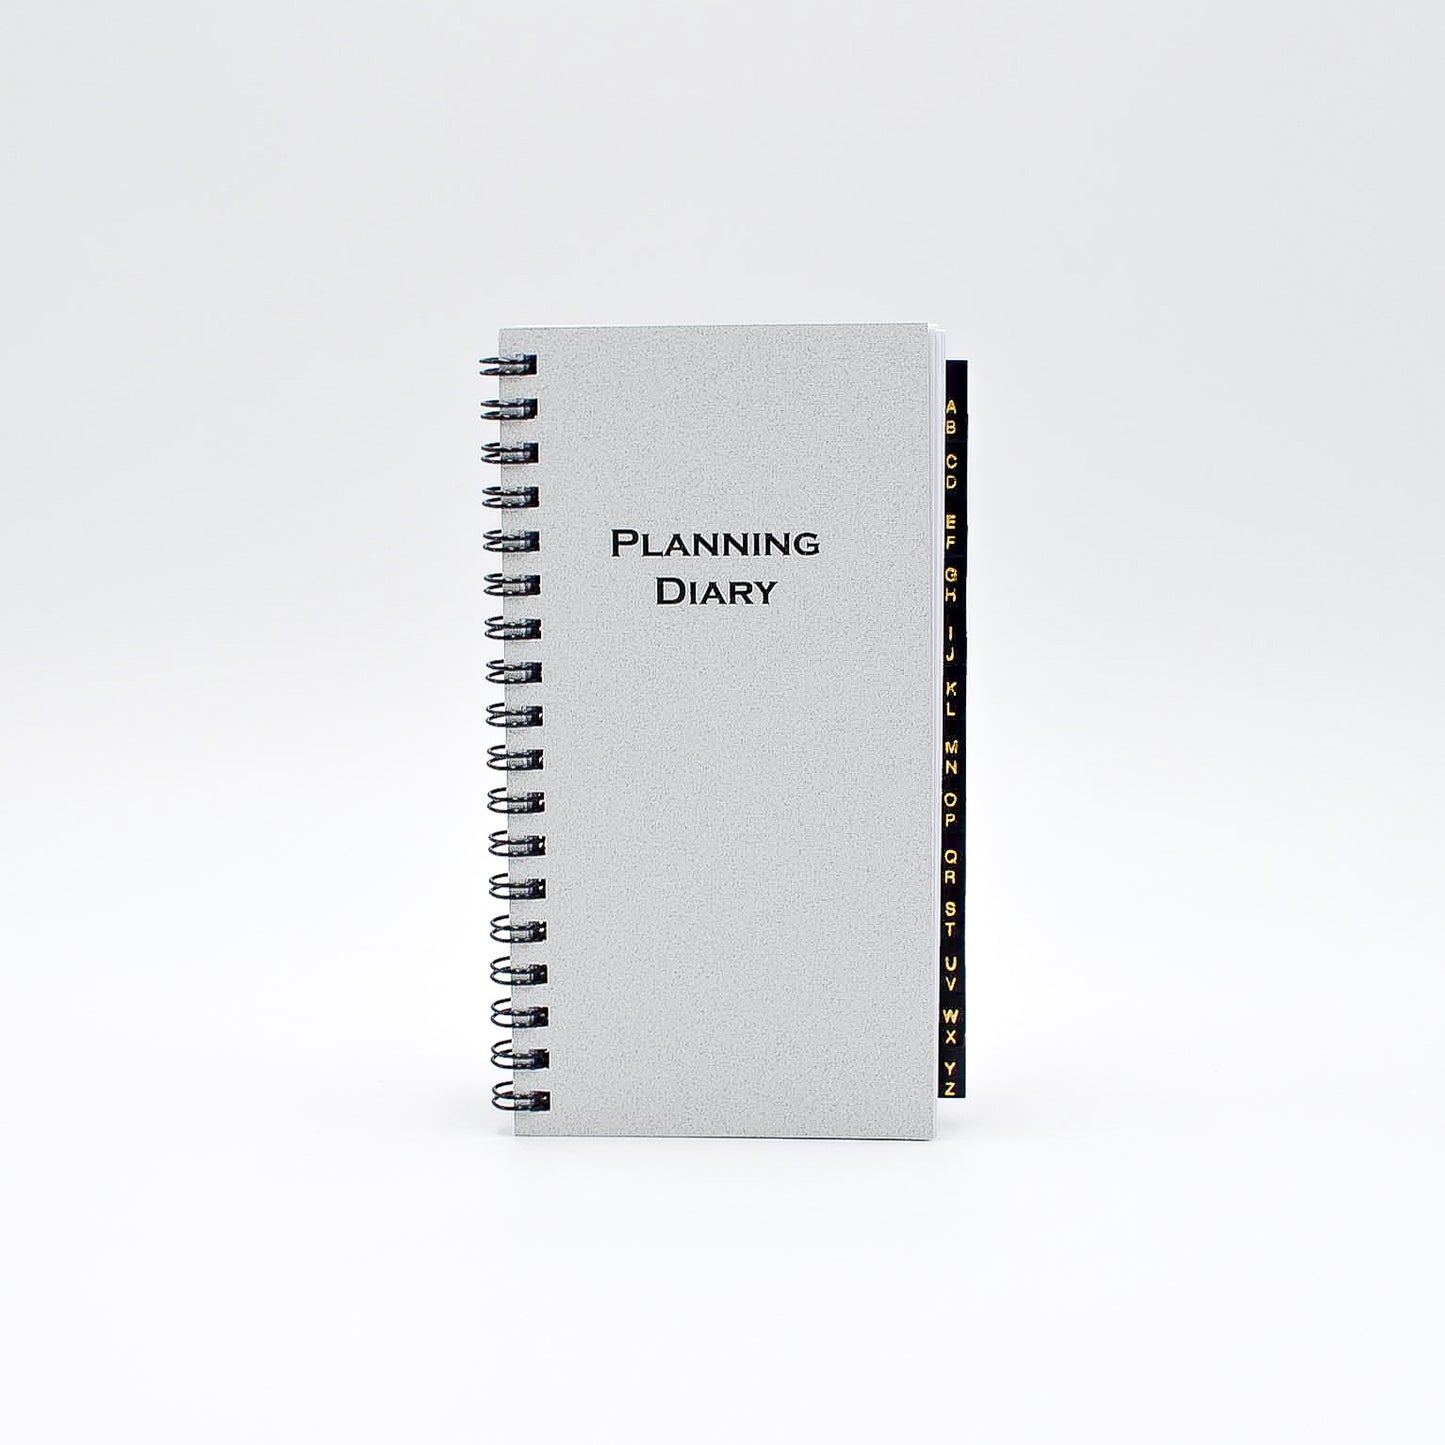 McCarthy Planner- Item MWA36W 12 Month Planner  White paper. Size 6-1/4" x 3-1/4" 144 pages; Weekly and Monthly View Format. One agenda planner; two formats. Also includes a 3 Yearly View, 12 Monthly View, 52 Weekly View. And includes Advance Planning, Important Dates, International Holidays, Birthdays and Anniversaries, Weights and Measures, Weather, Interest Rates, Road and Air Miles...and more!  INCLUDES Address Section with Leatherette Tabs.  Made in the USA!